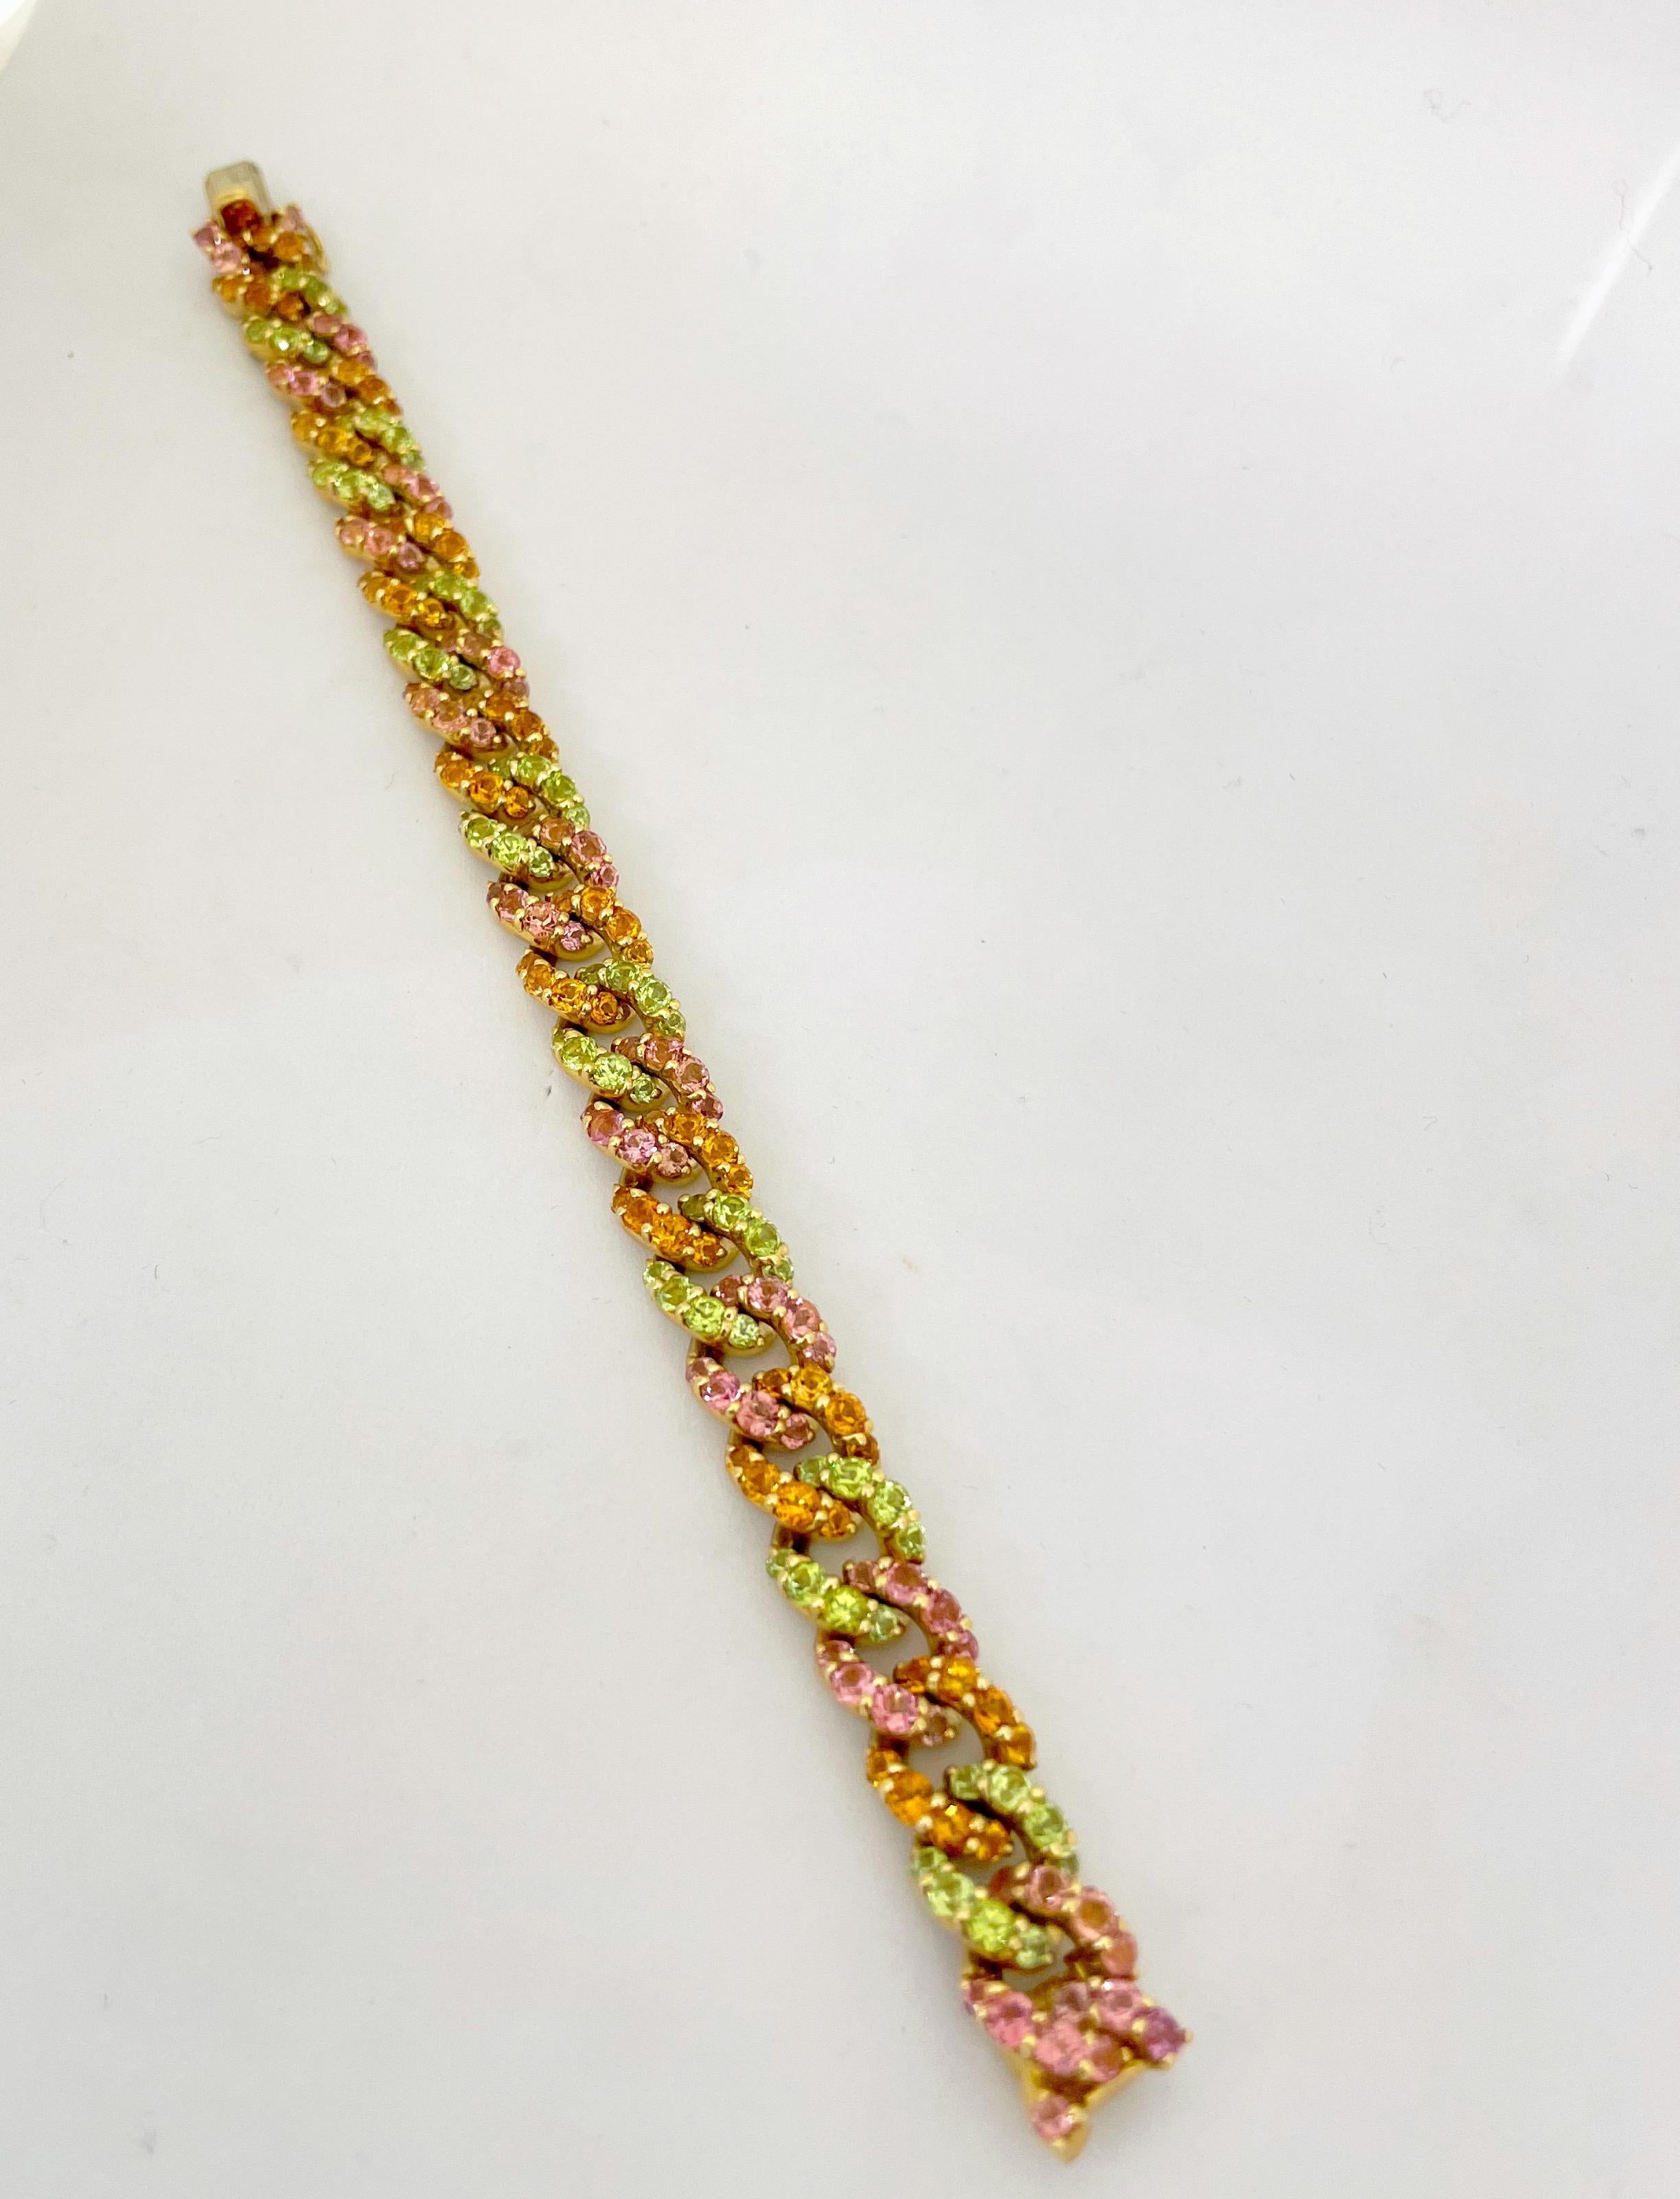 Vaid Roma 18 Karat Gold Curbed Link Bracelet 19.65 Carat Semi-Precious Stones In New Condition For Sale In New York, NY